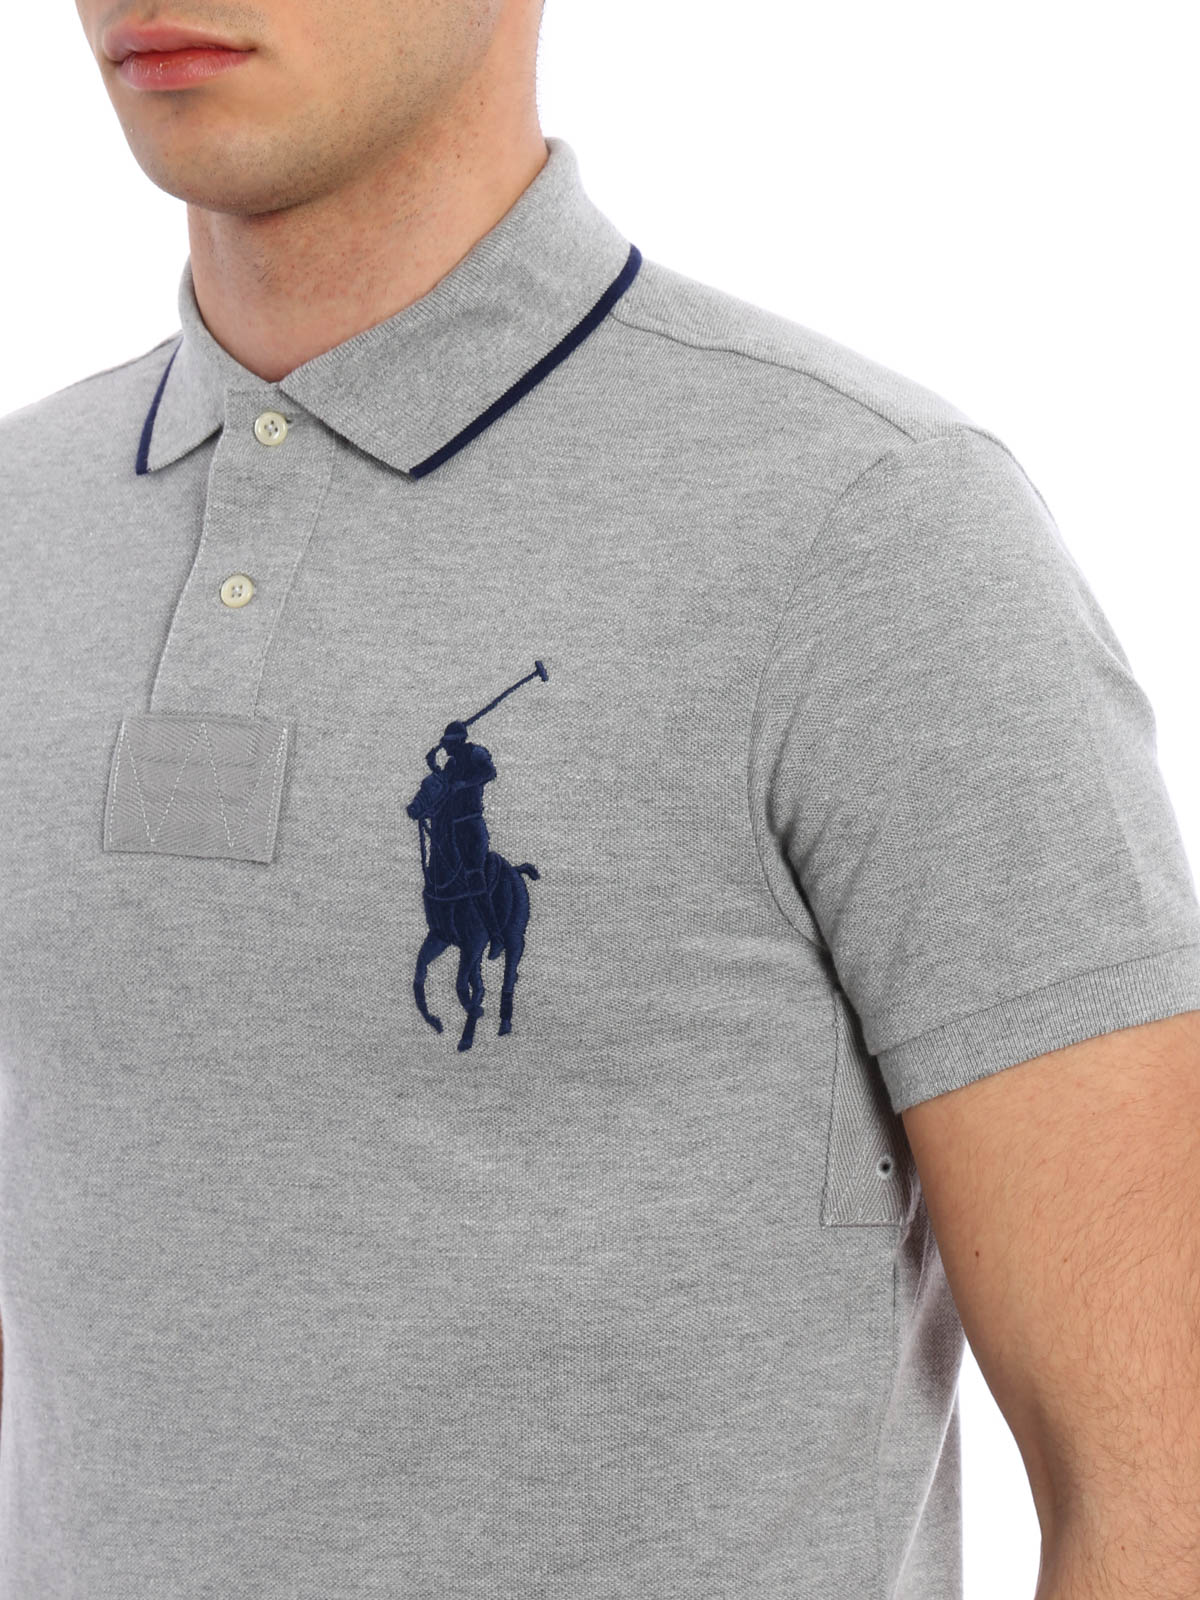 Design Your Own Polo Shirts Online - Prism Contractors & Engineers